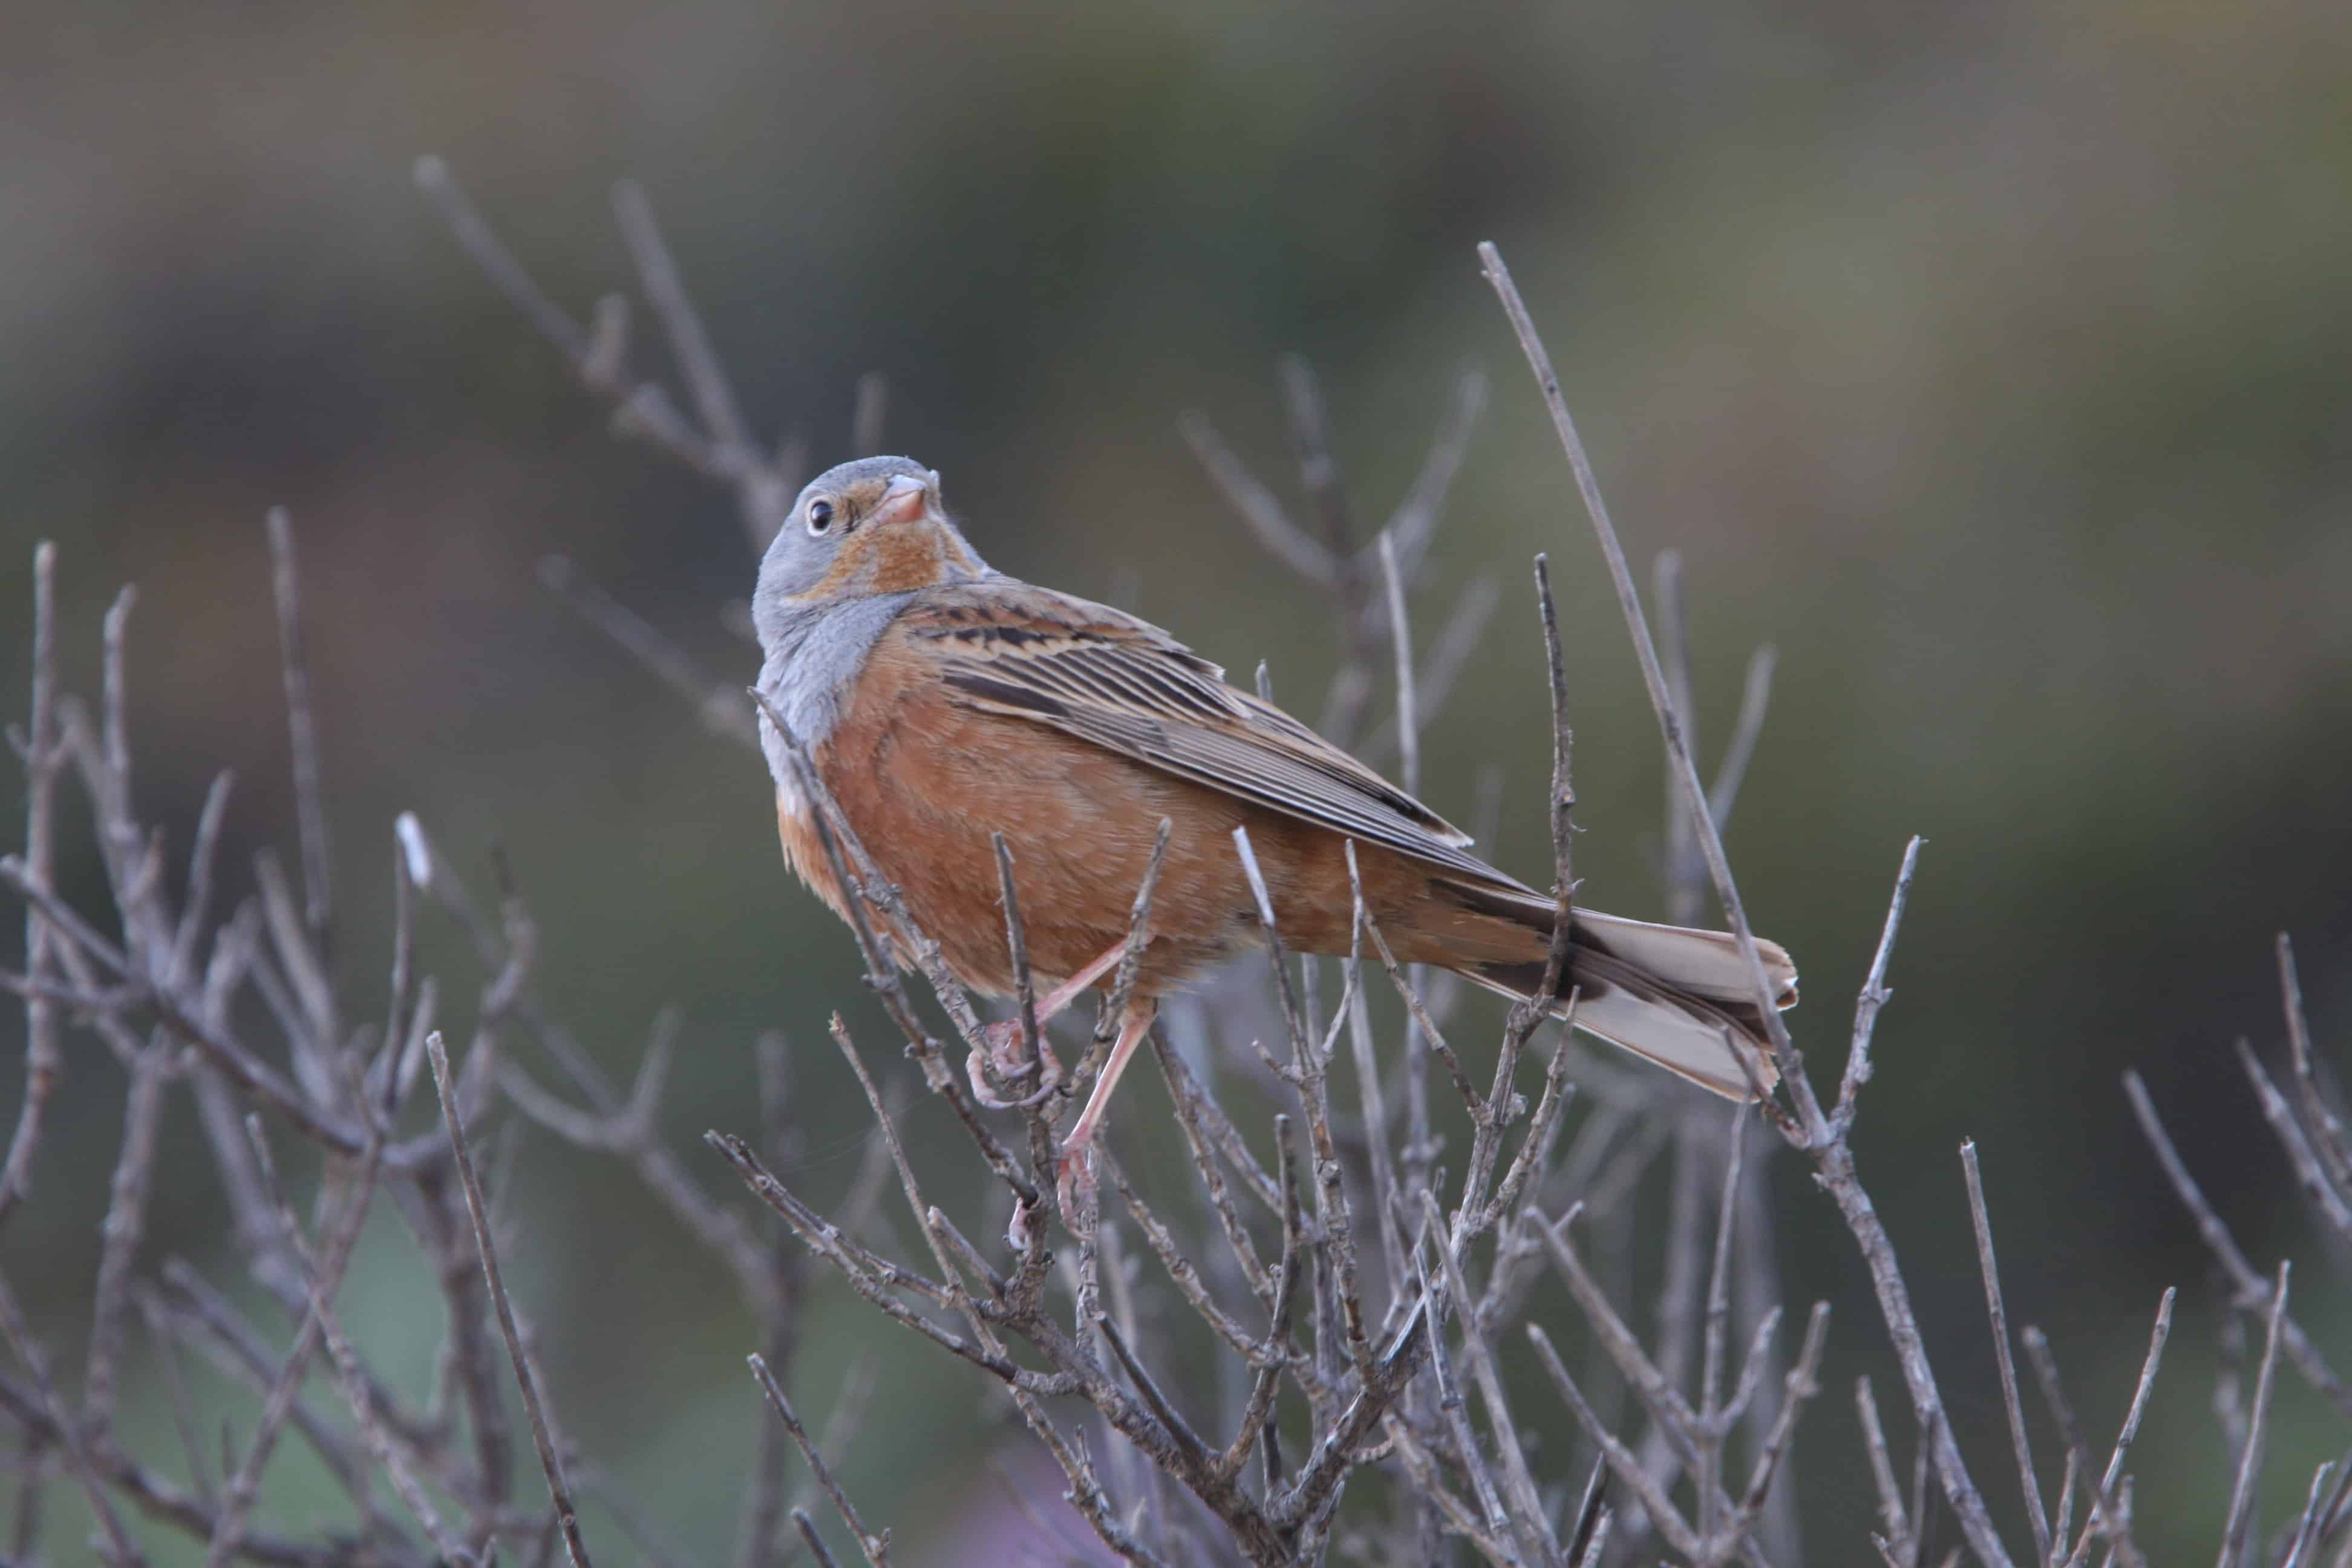 Cretzschmar's bunting, a breeding species and abundant migrant, one of those threatened by illegal trapping. Copyright: Dr Mike Pienkowski